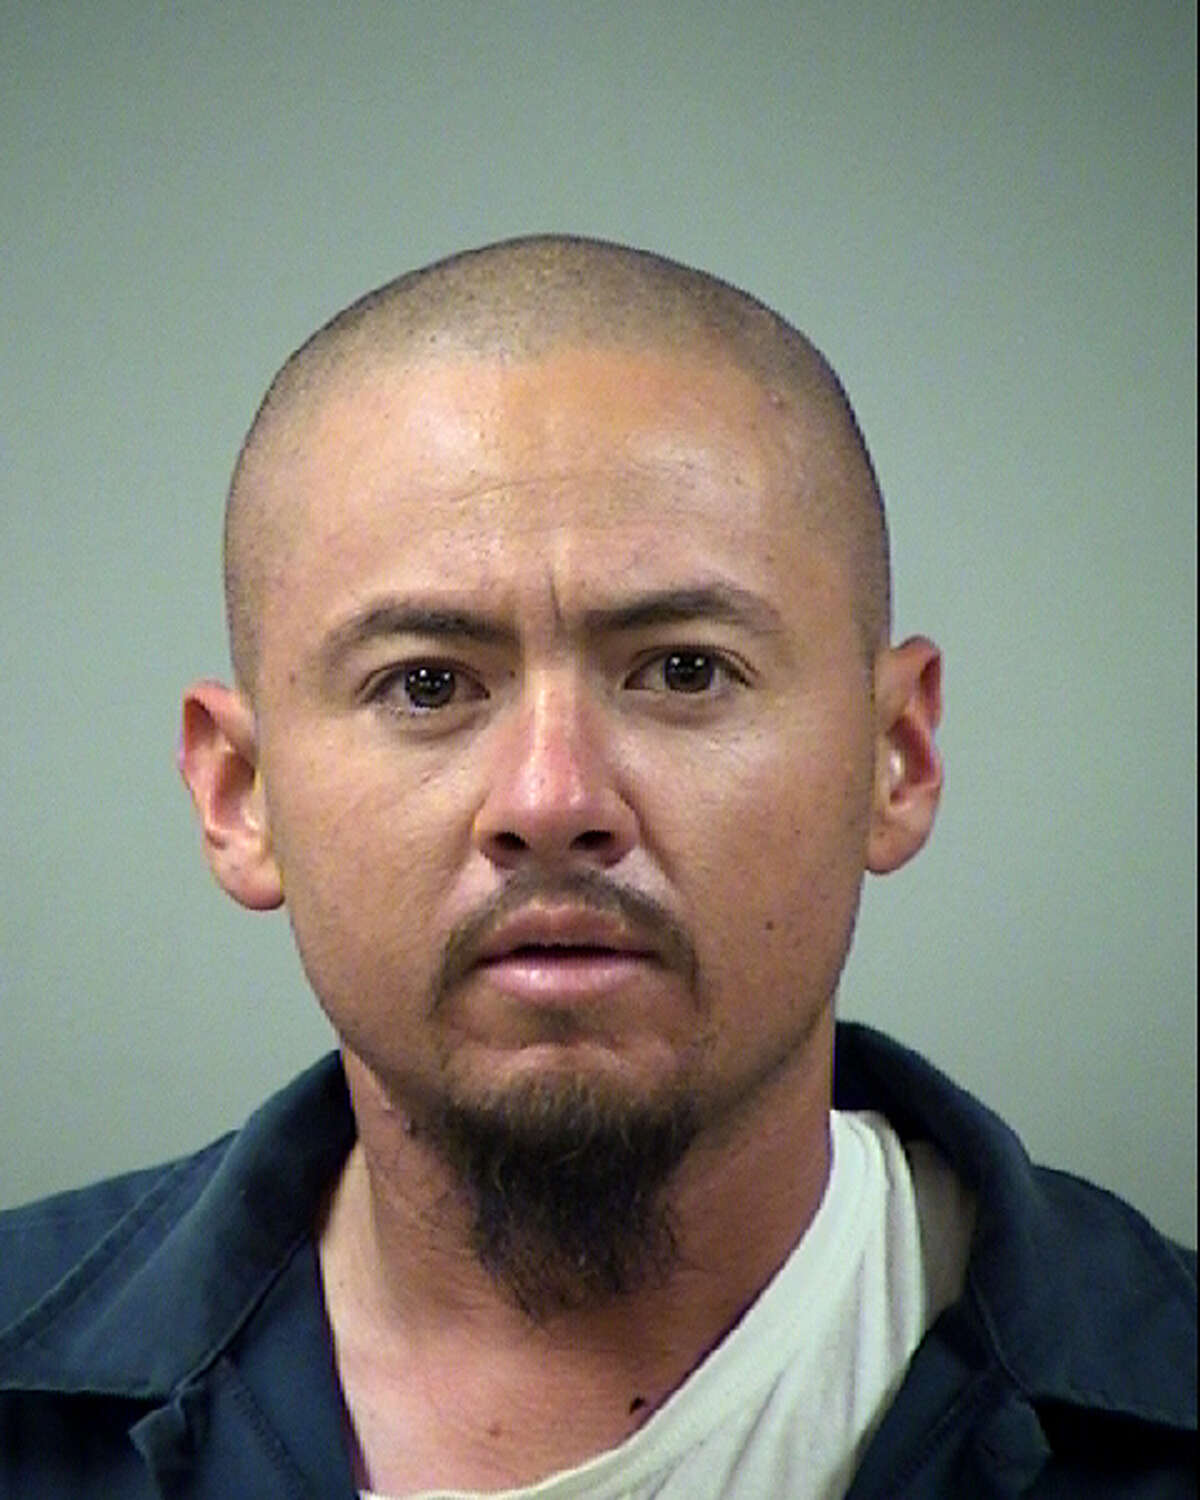 Anthony Garay, 31, now faces a charge of continuous sexual abuse of a child, a first-degree felony. He remains in the Bexar County Jail on a $75,000 bond.